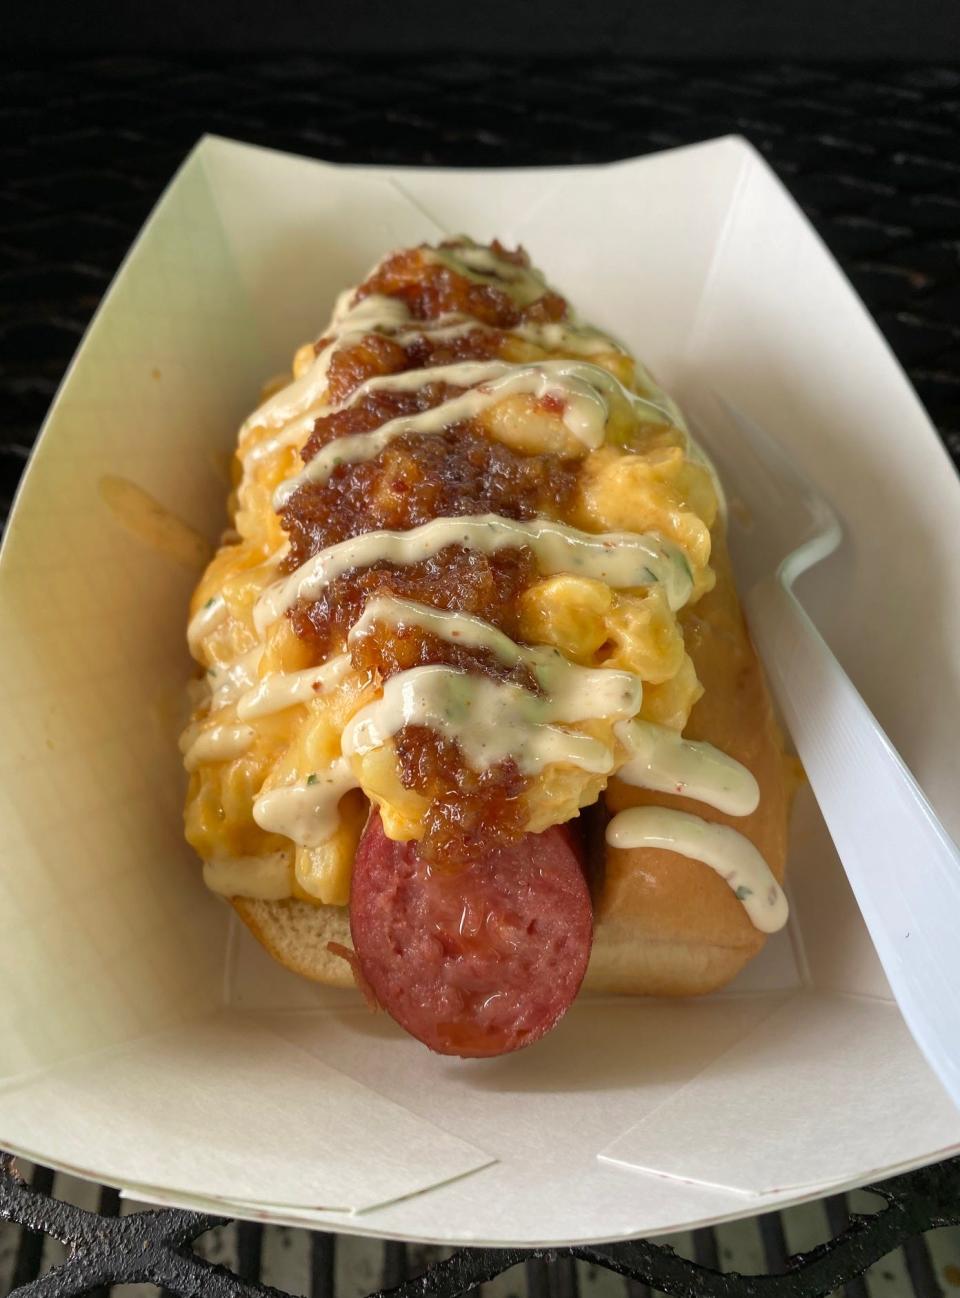 Food Fire and Ferment’s Big Beefy Boy — a ¼-pound smoked beef sausage topped with mac and cheese, beer bacon jam and chipotle ranch.